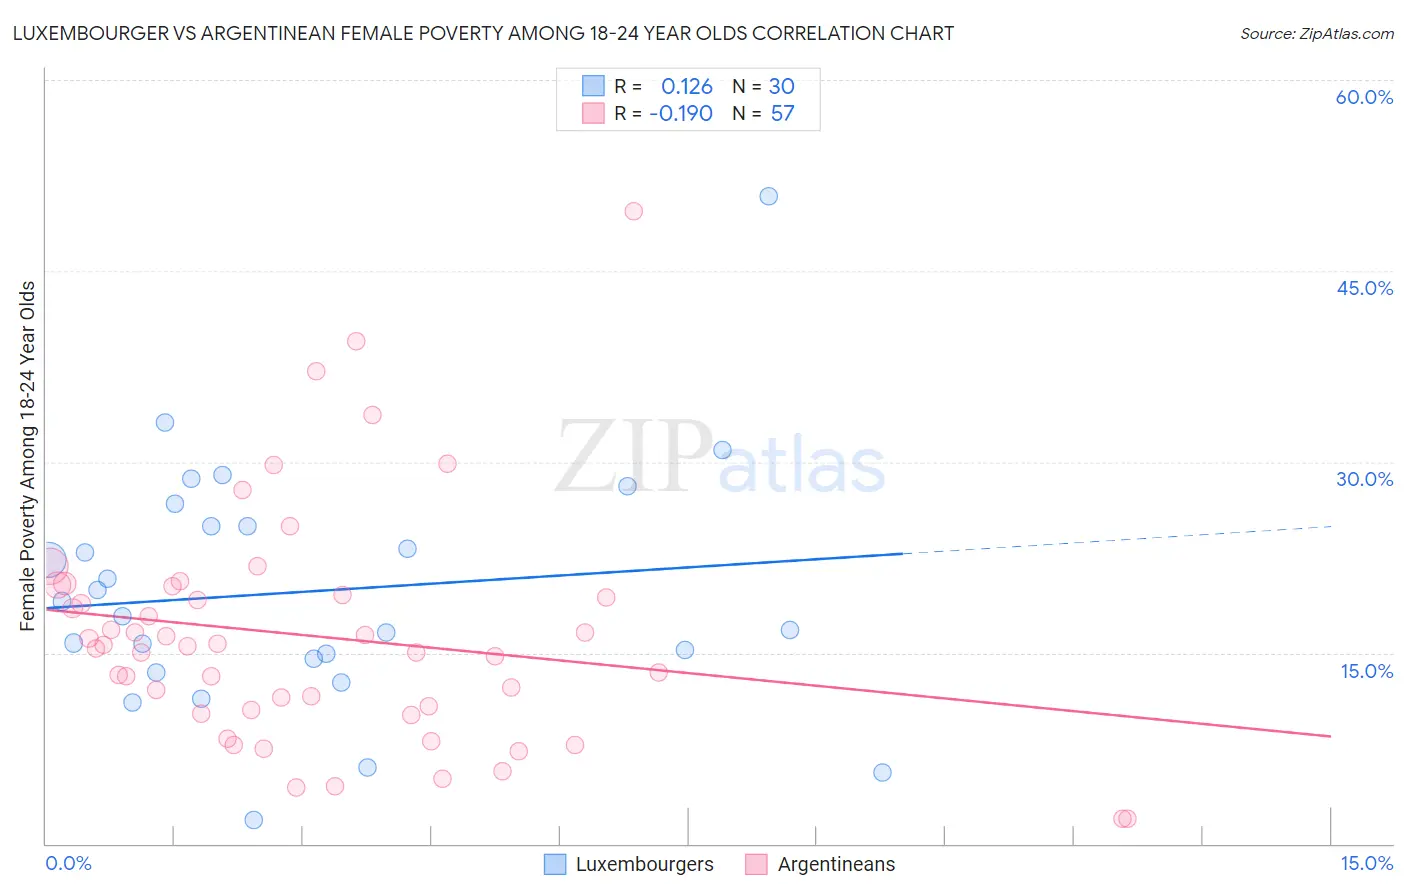 Luxembourger vs Argentinean Female Poverty Among 18-24 Year Olds